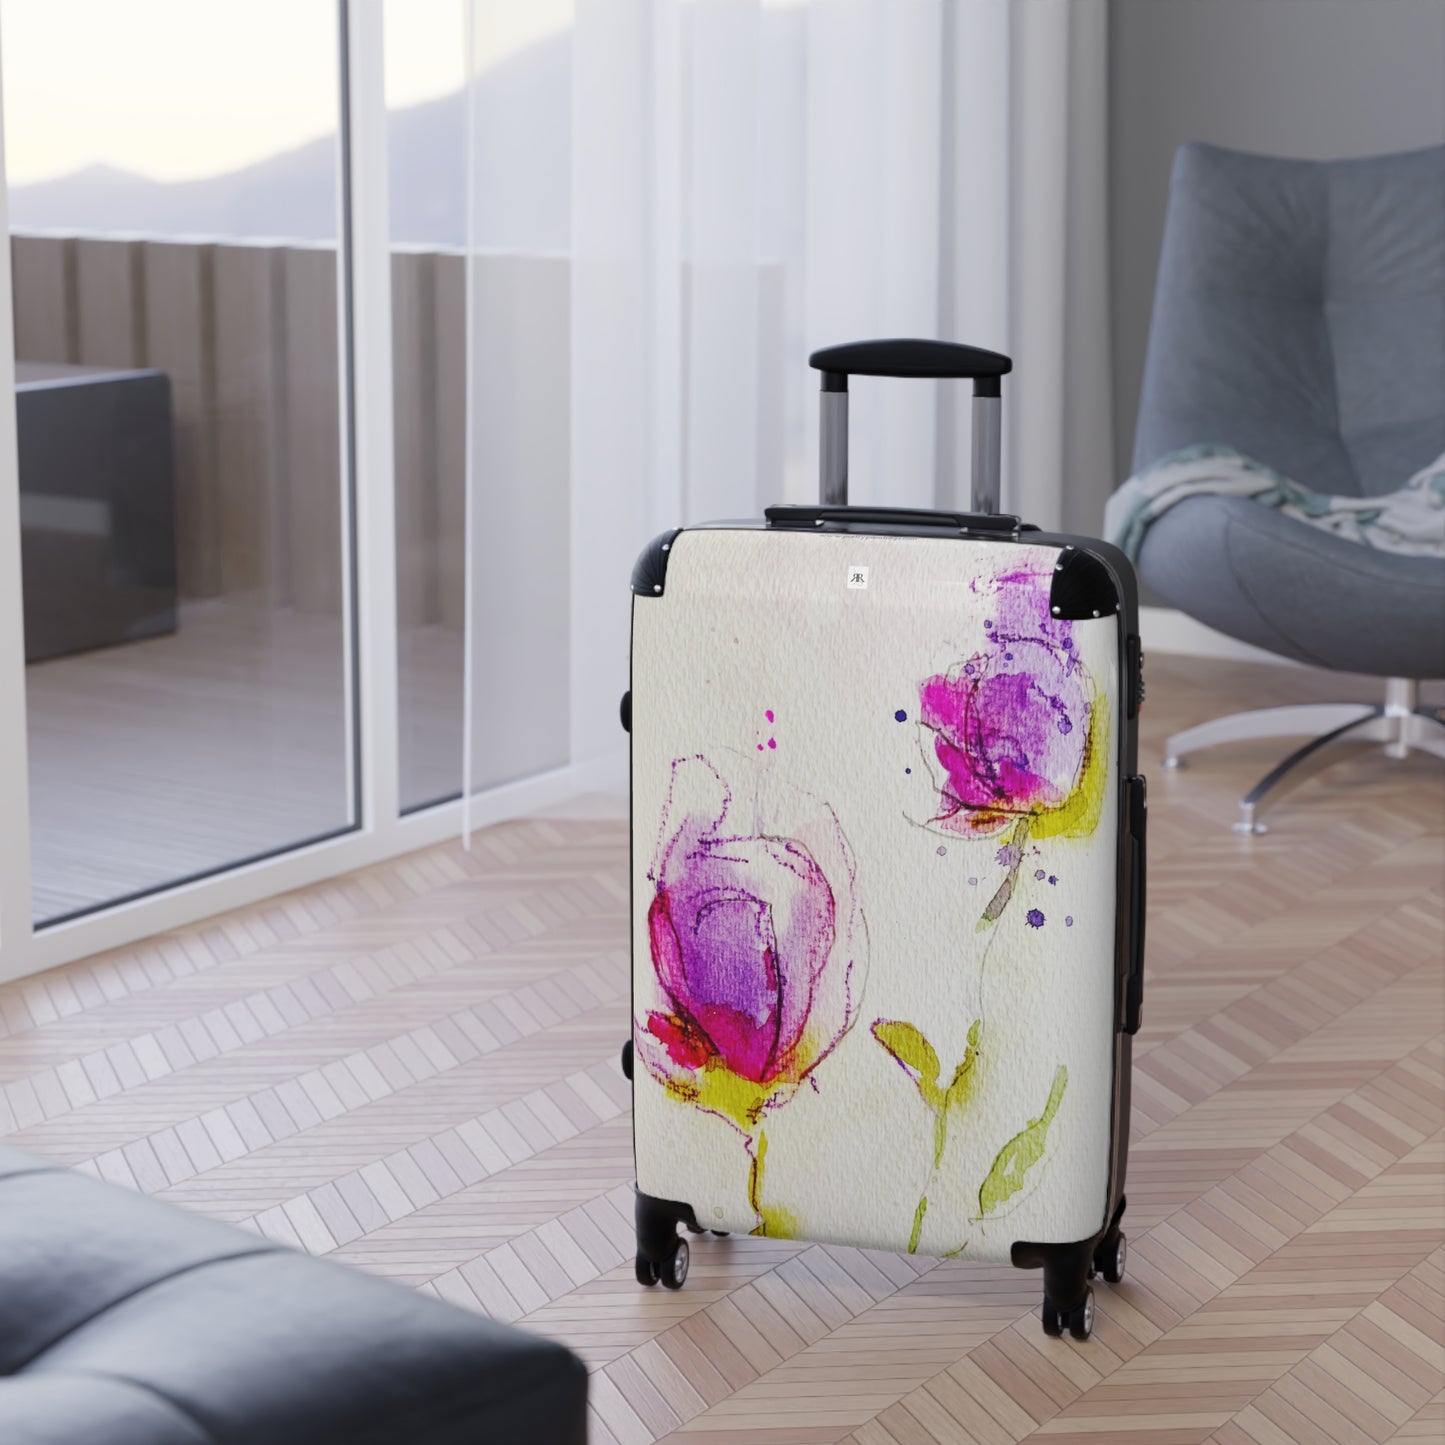 Loose Floral Buds Carry on Suitcase